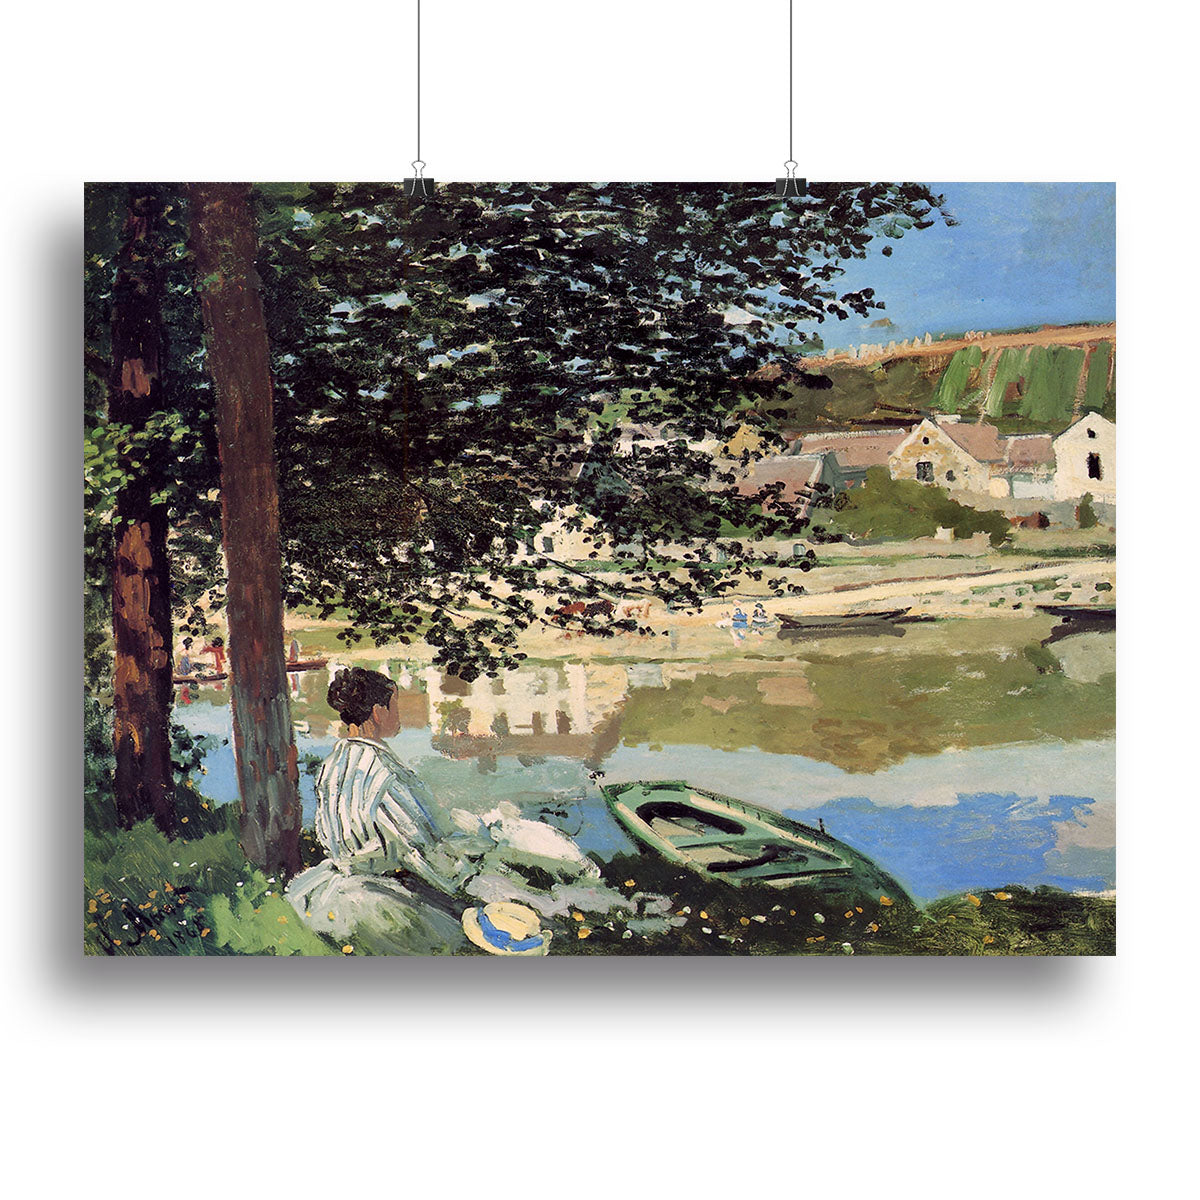 Seine bank at Vethueil by Monet Canvas Print or Poster - Canvas Art Rocks - 2